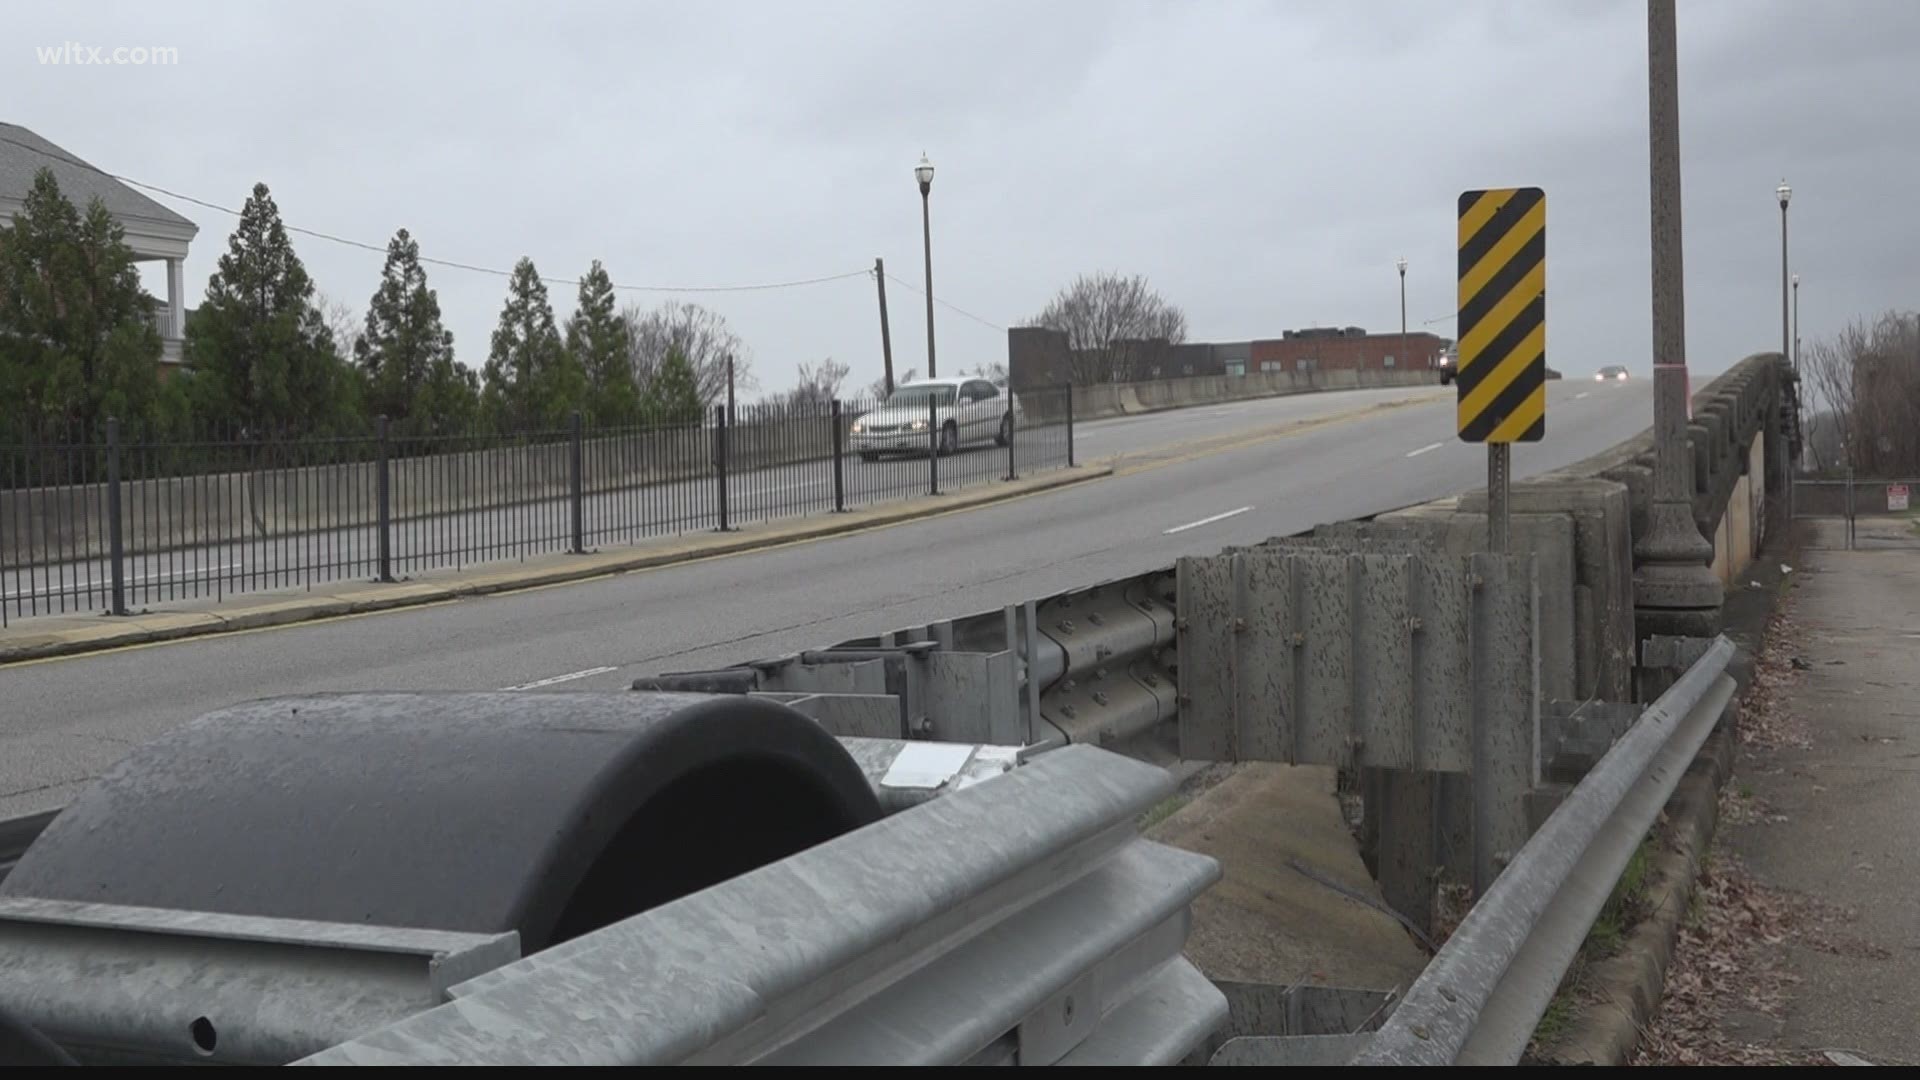 Department of Transportation wants feedback on options available for replacement of traffic bridge over rail lines in downtown Columbia